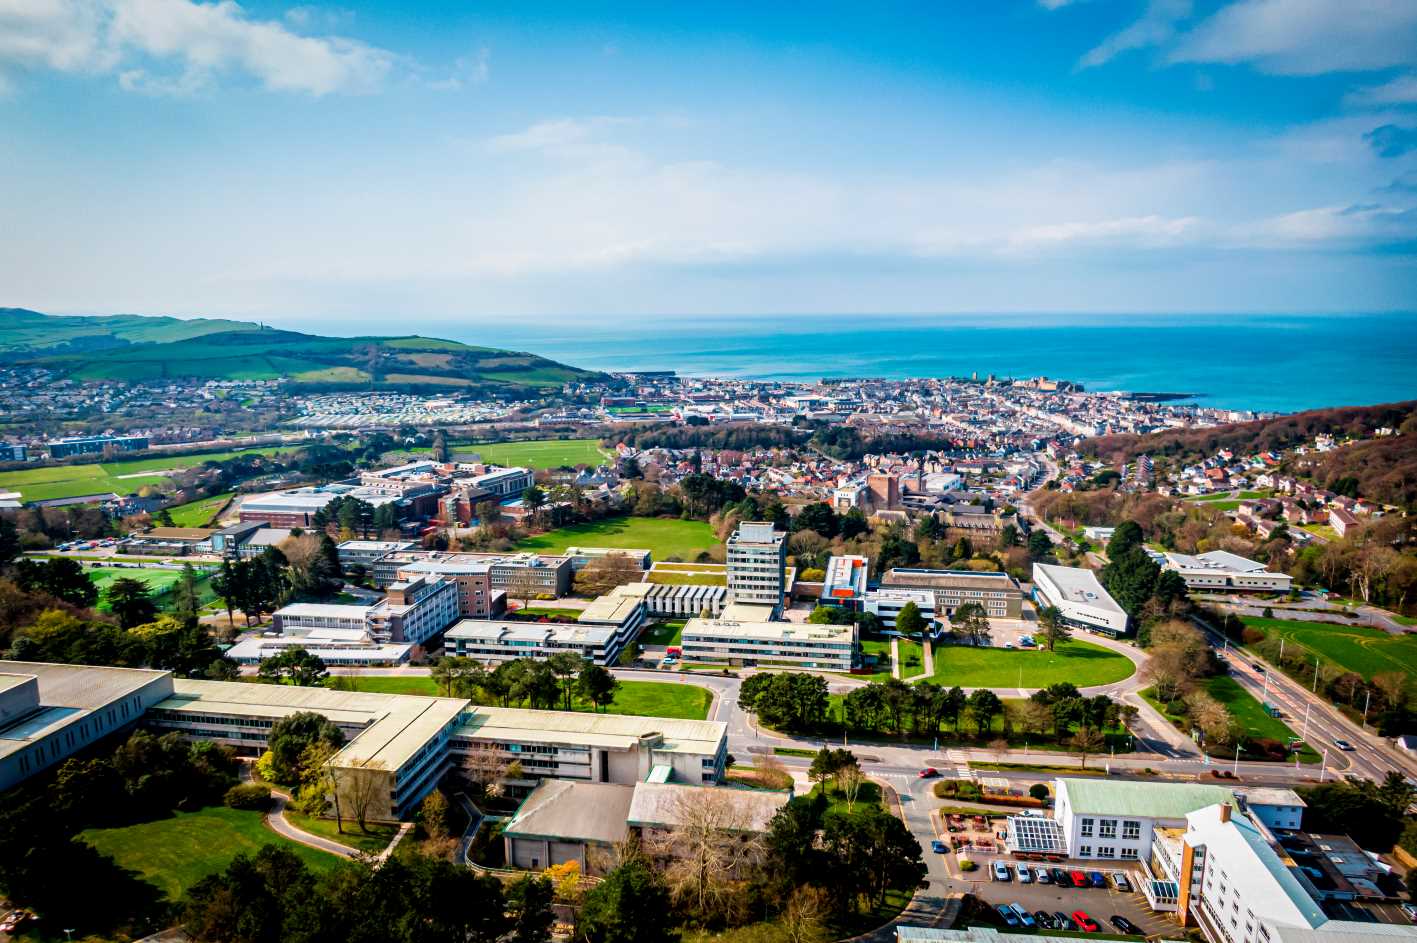 ABERYSTWYTH UNIVERSITY AIMS FOR CARBON NEUTRALITY BY 2030